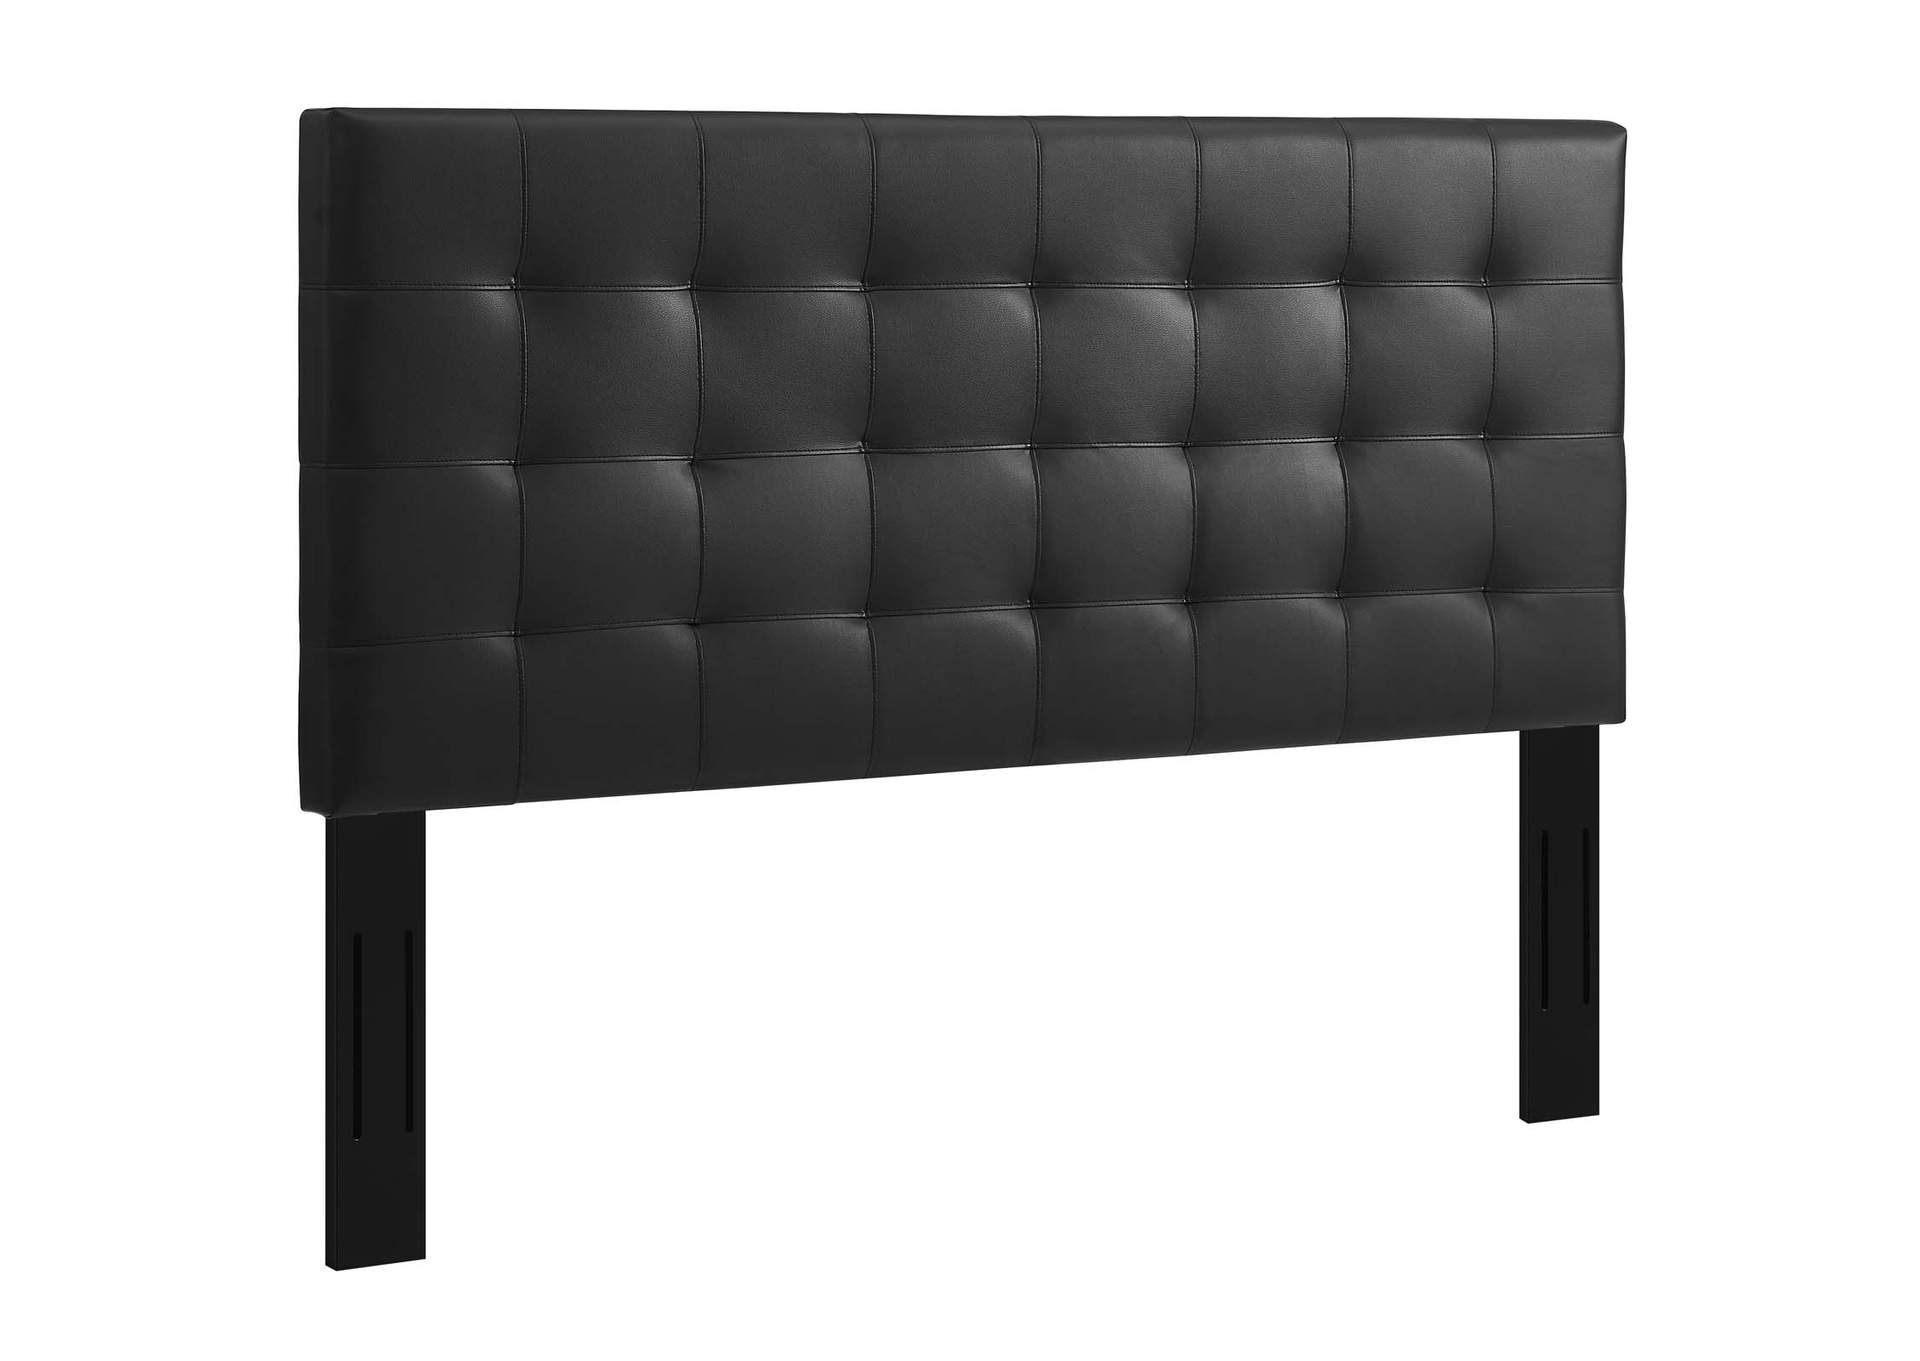 Paisley Black Tufted King and California King Upholstered Faux Leather Headboard,Modway